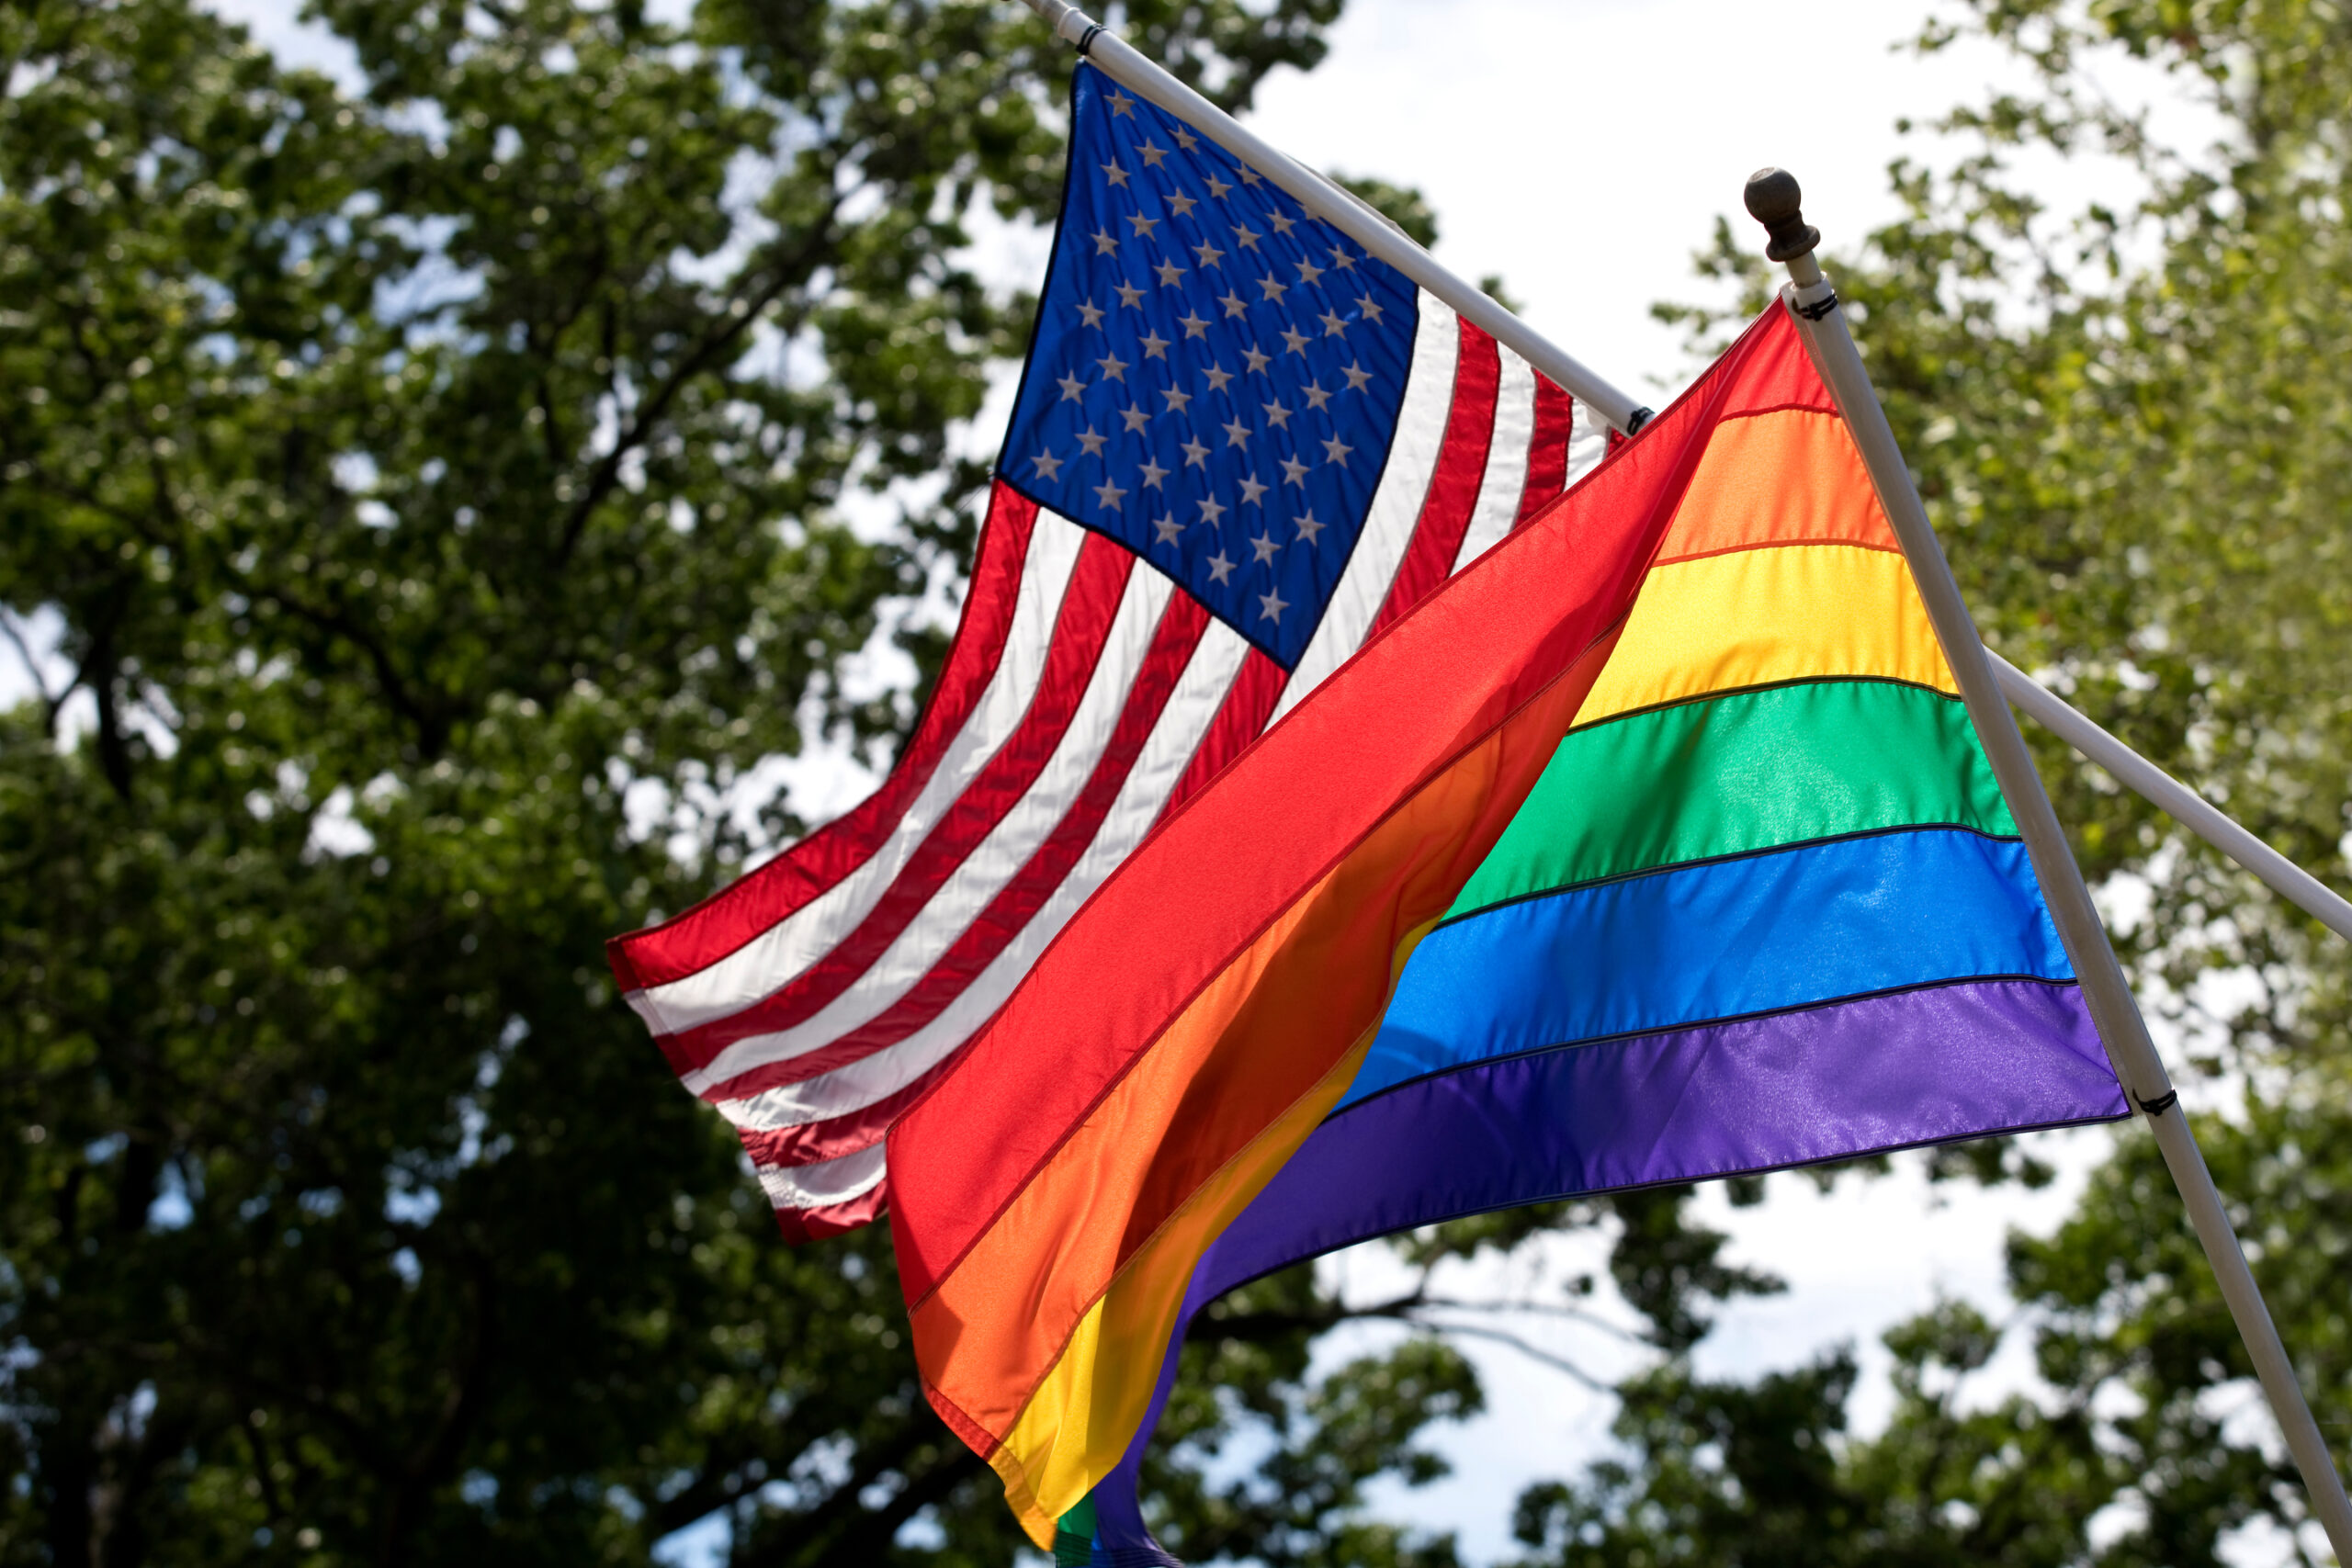 OPINION: Federal court decision harmful to Florida’s LGBTQ youth